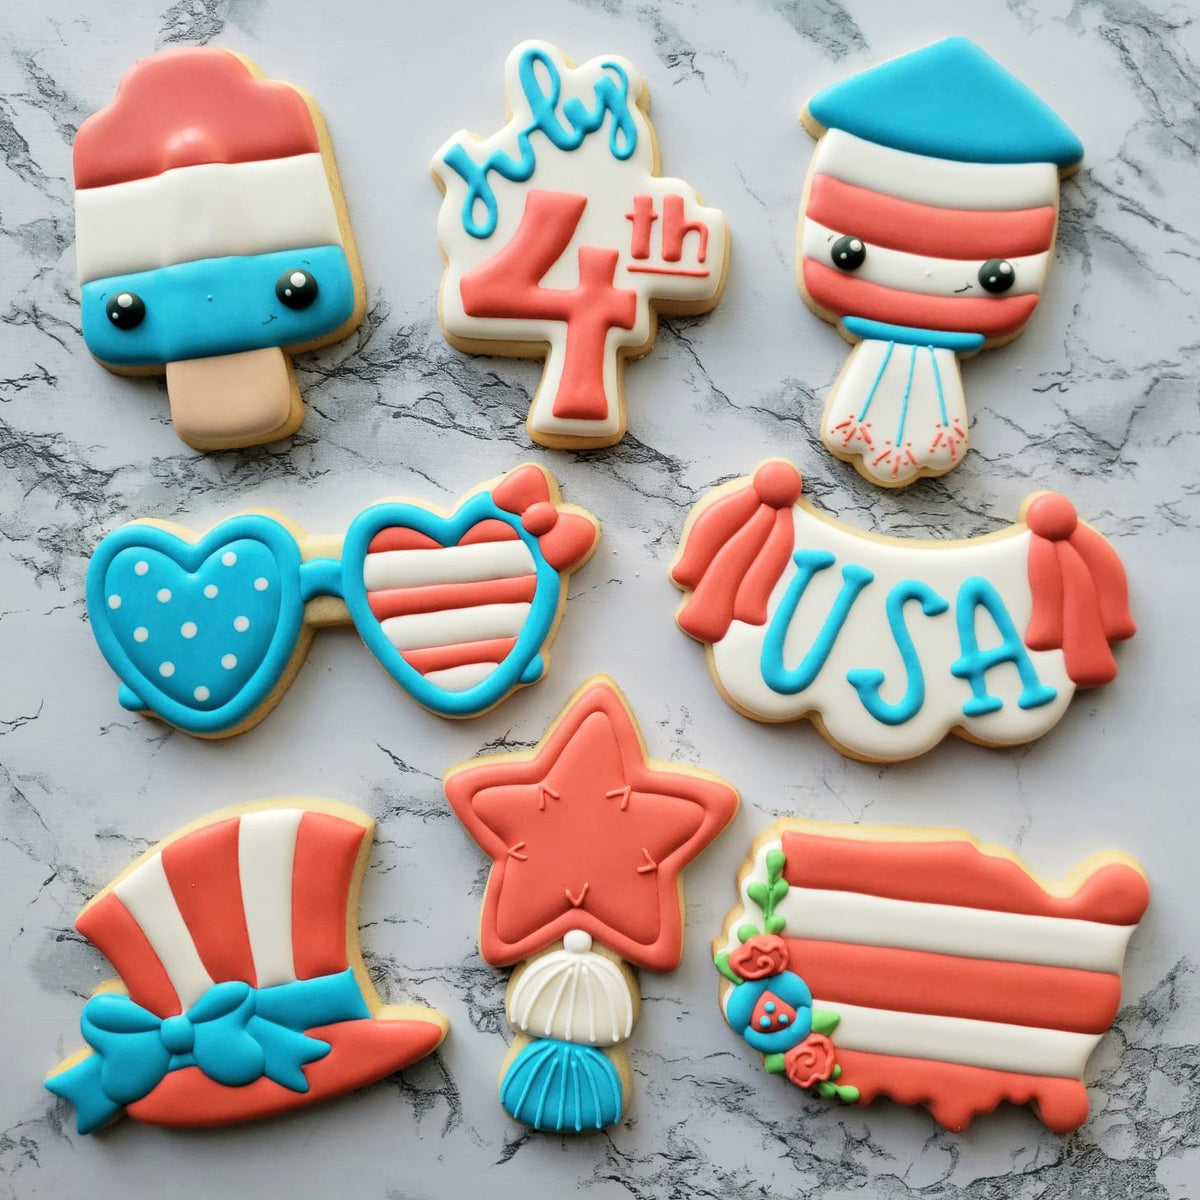 Paper Street Parlour 4th of July Cookie Cutter Class Set